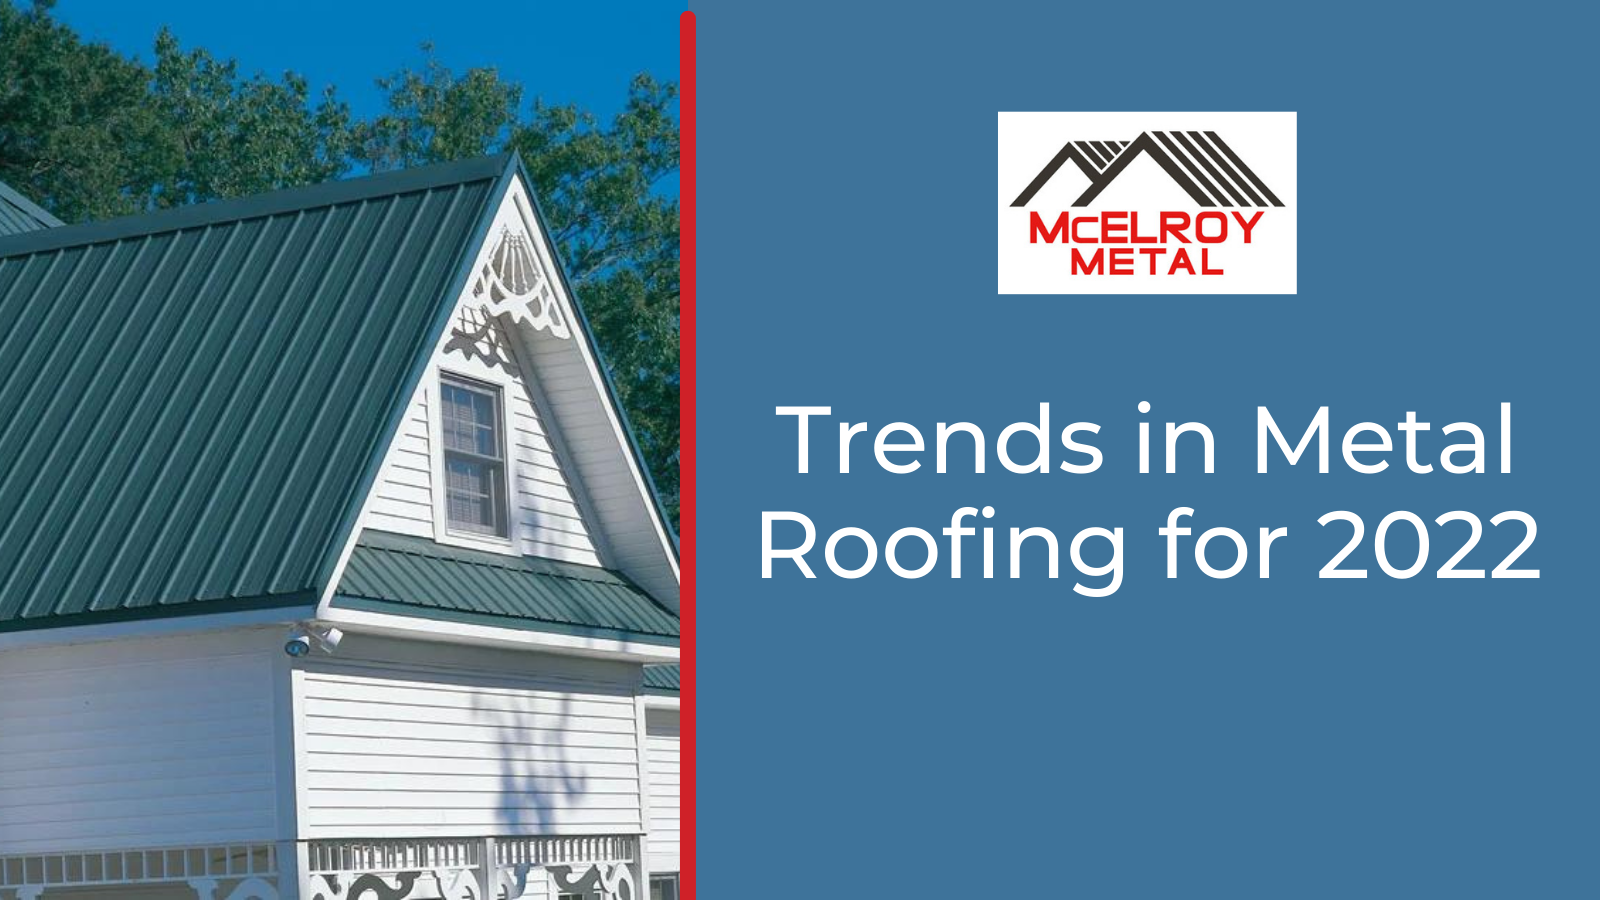 trends-in-metal-roofing-for-2022-featured-image